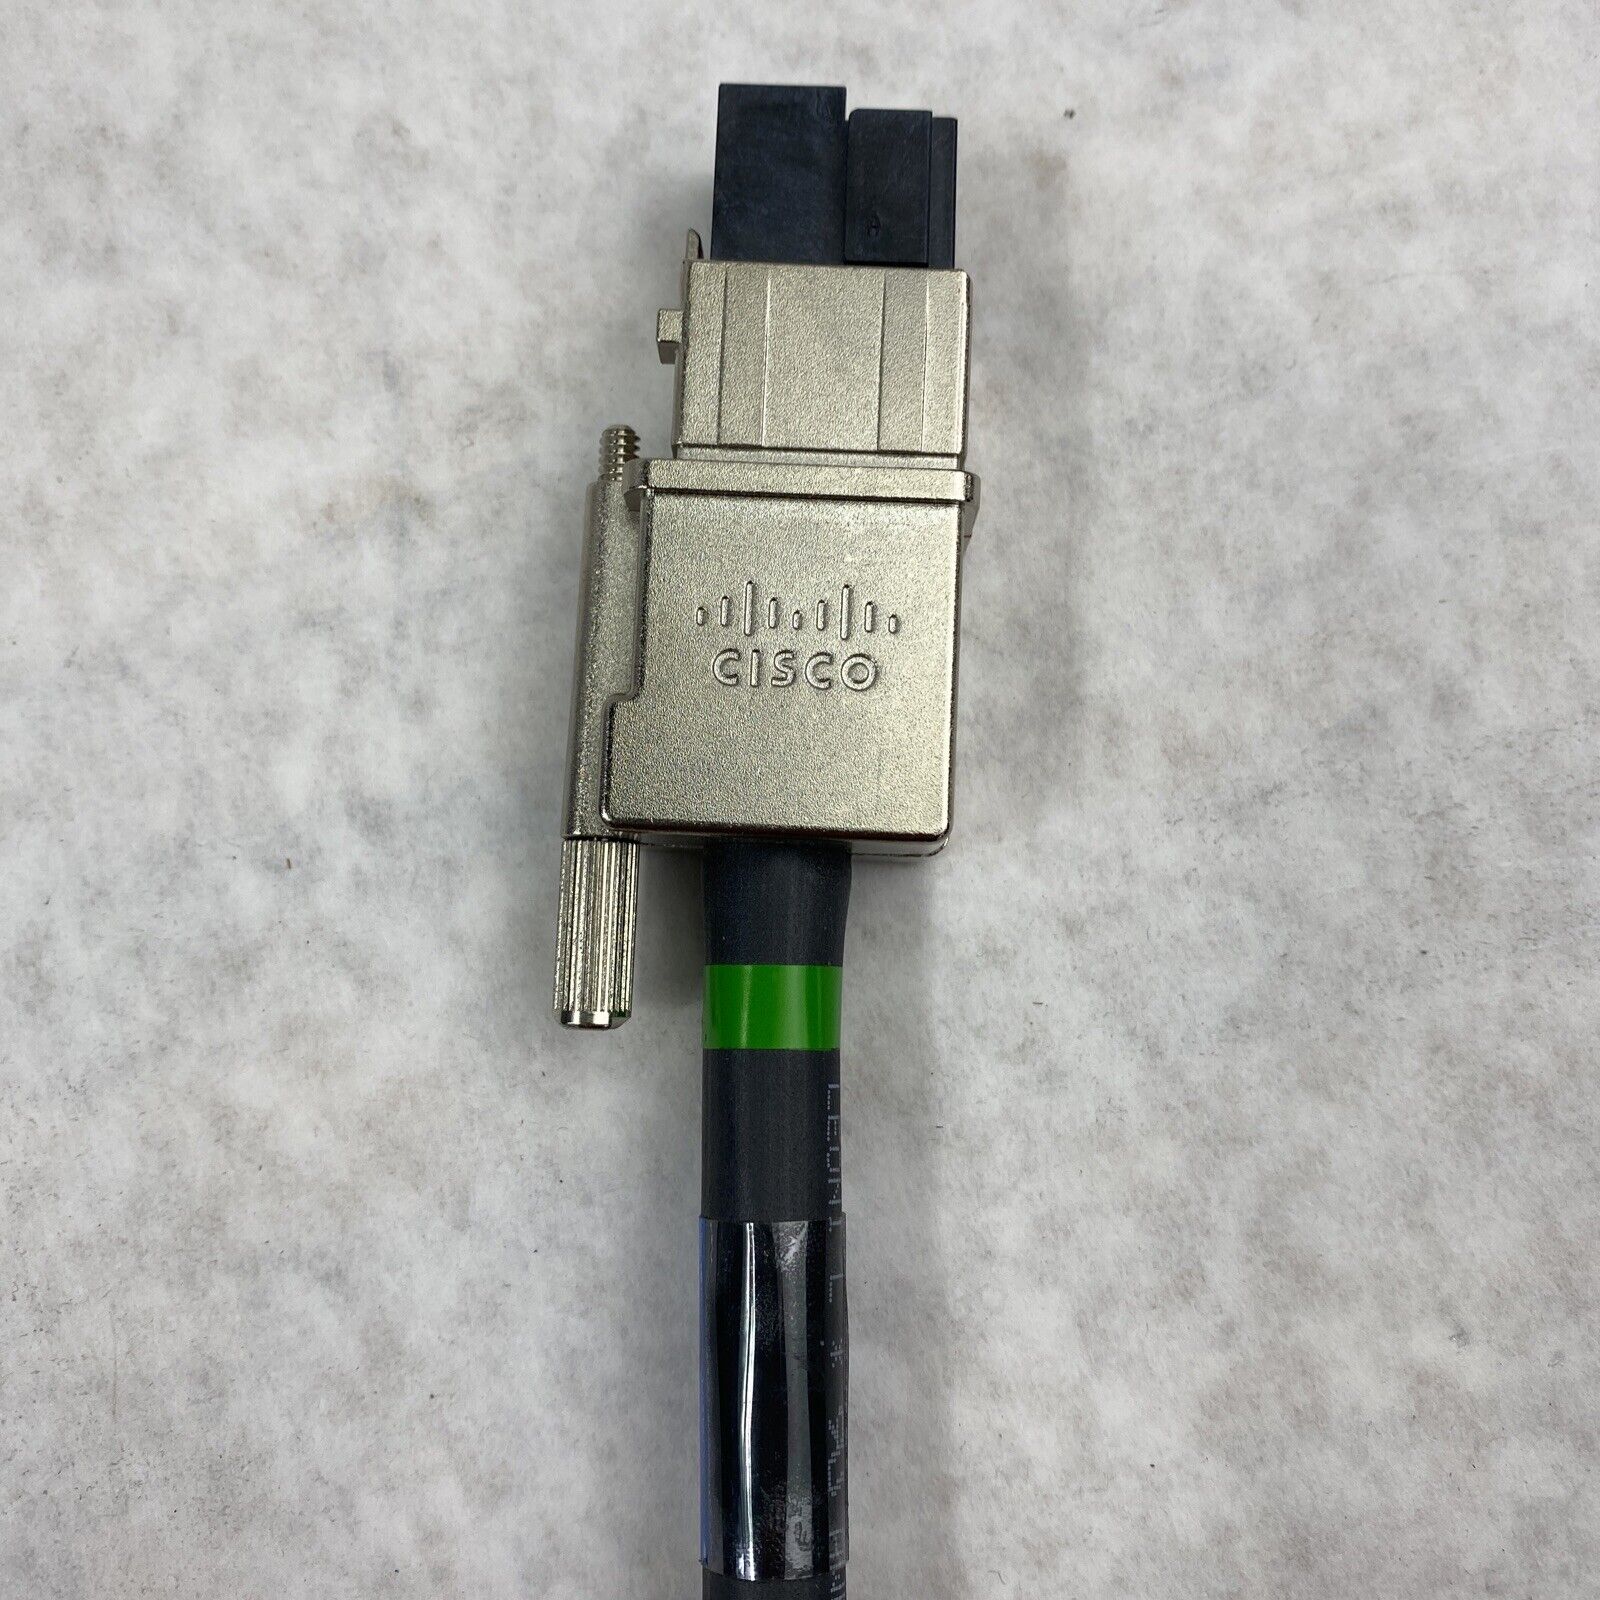 Cisco 37-1122-01 A0 Genuine Power Stack Cable for Cisco Catalyst Switch